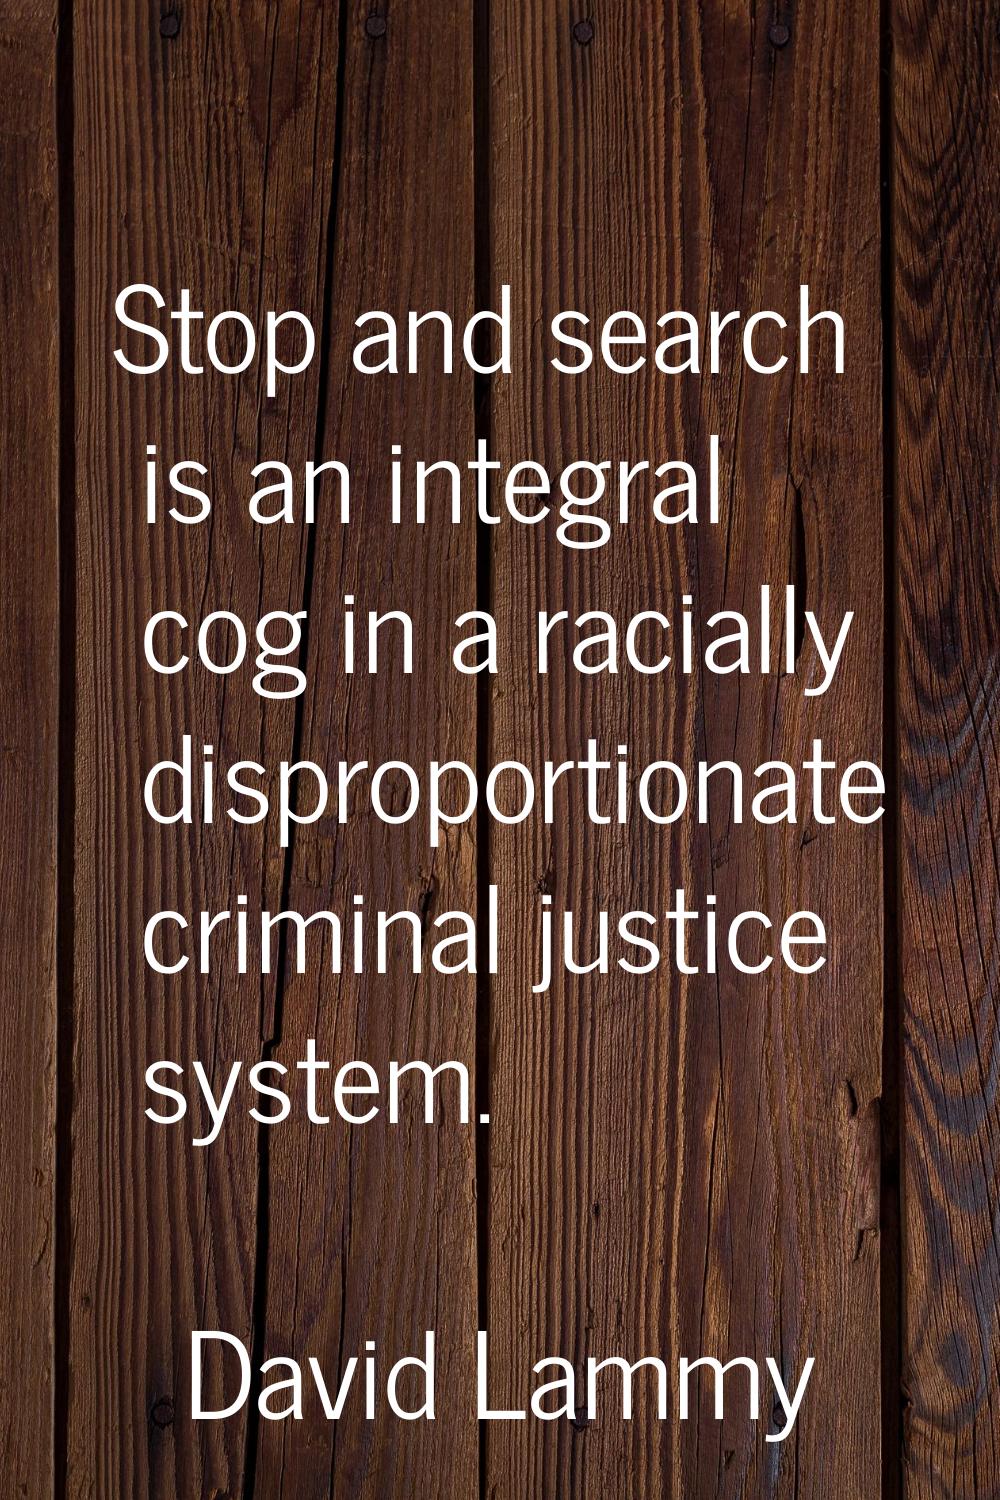 Stop and search is an integral cog in a racially disproportionate criminal justice system.